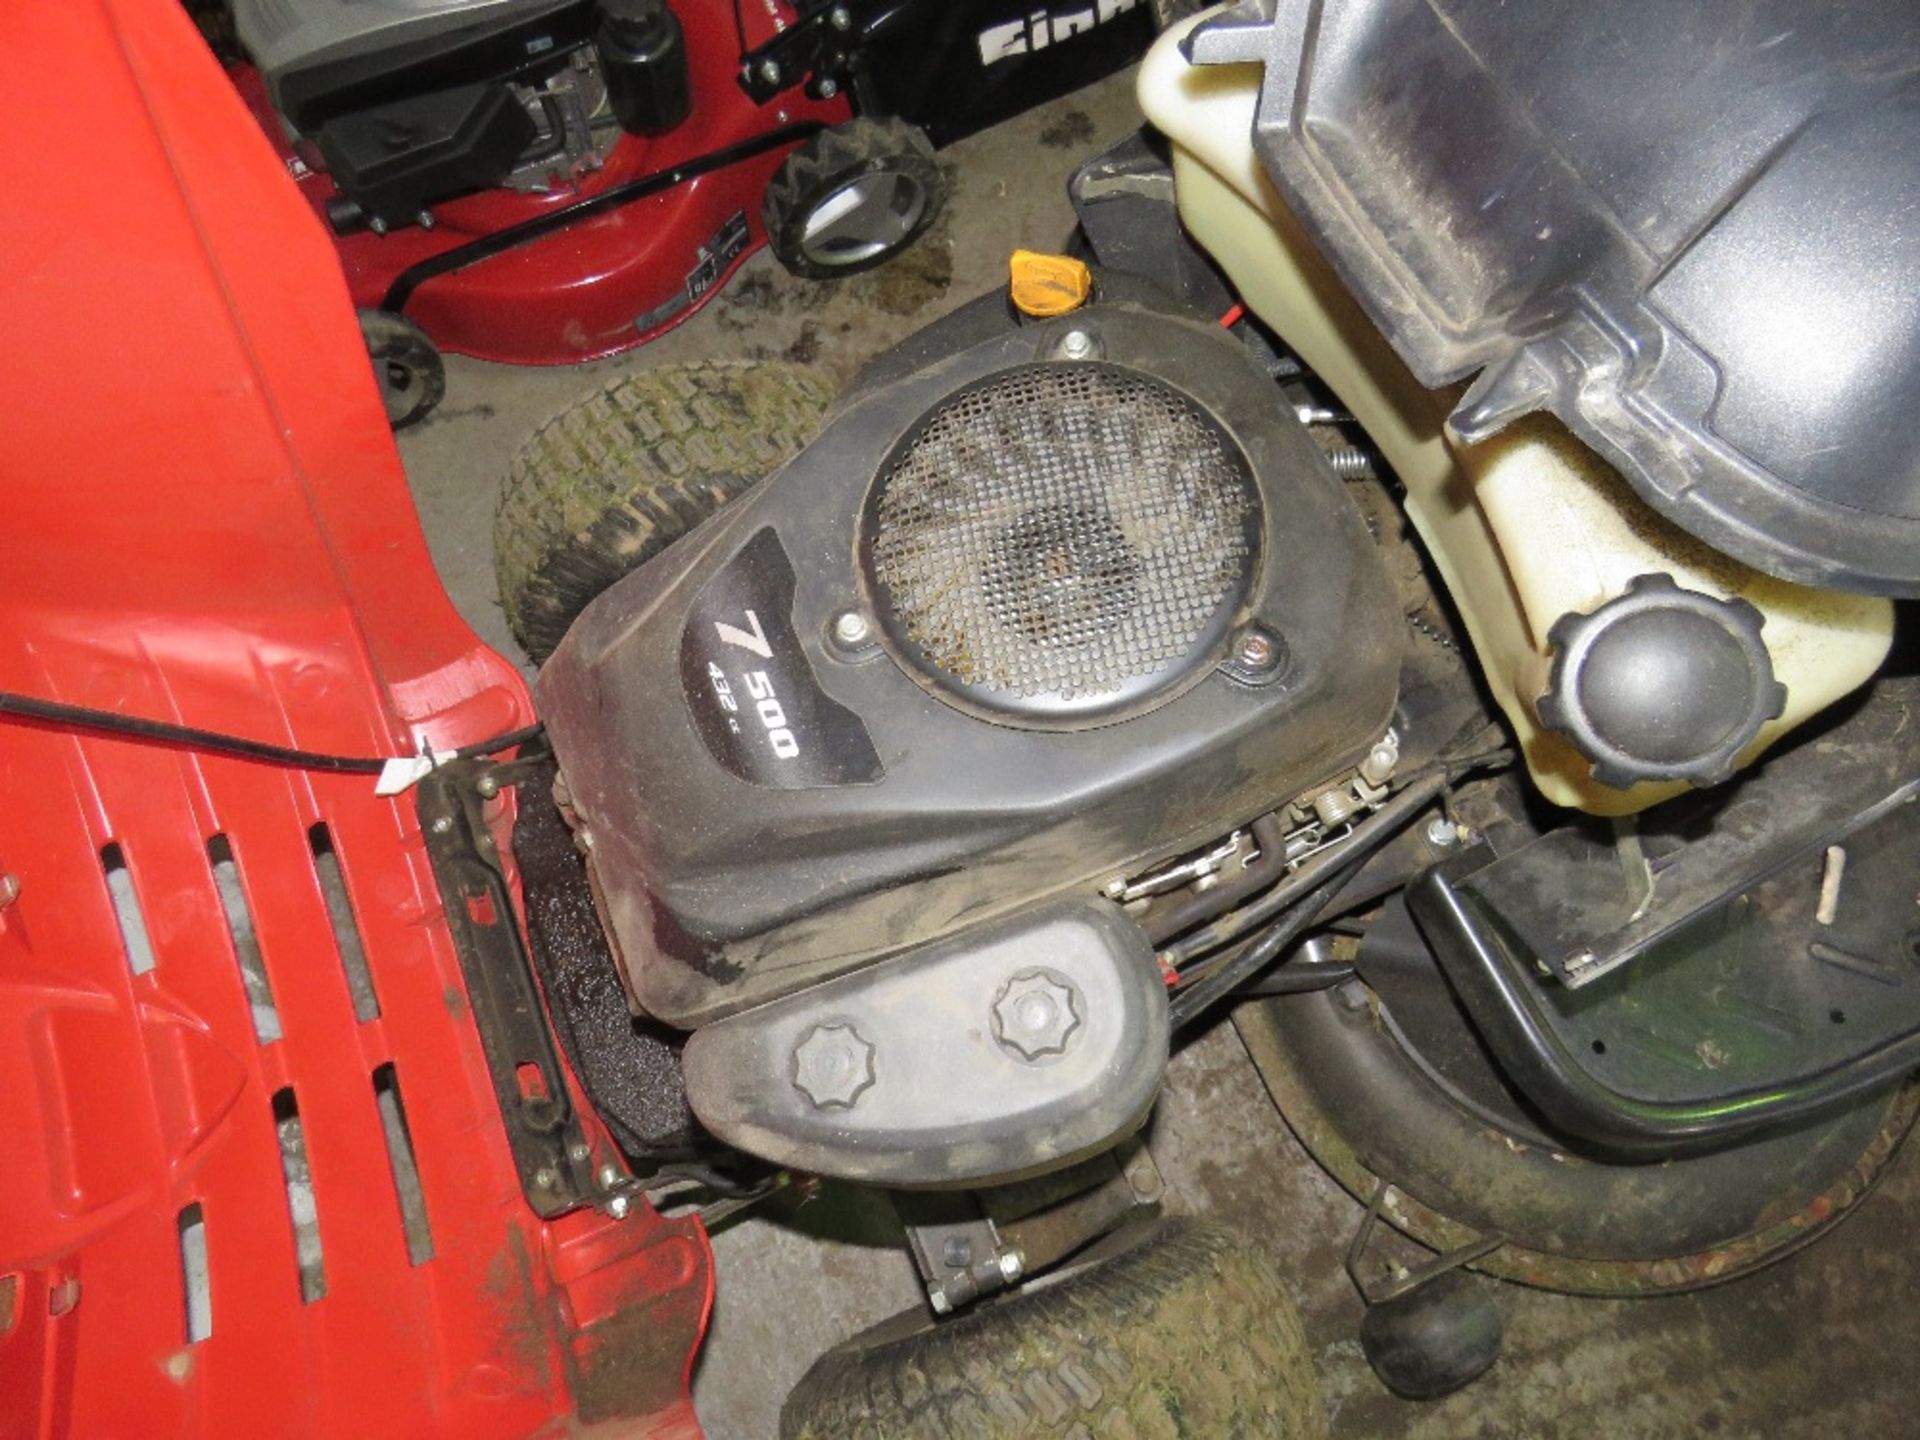 MOUNTFIELD 1538SD RIDE ON MOWER, YEAR 2012, HYDRASTATIC DRIVE. WHEN TESTED WAS SEEN TO RUN BUT WOULD - Image 2 of 5